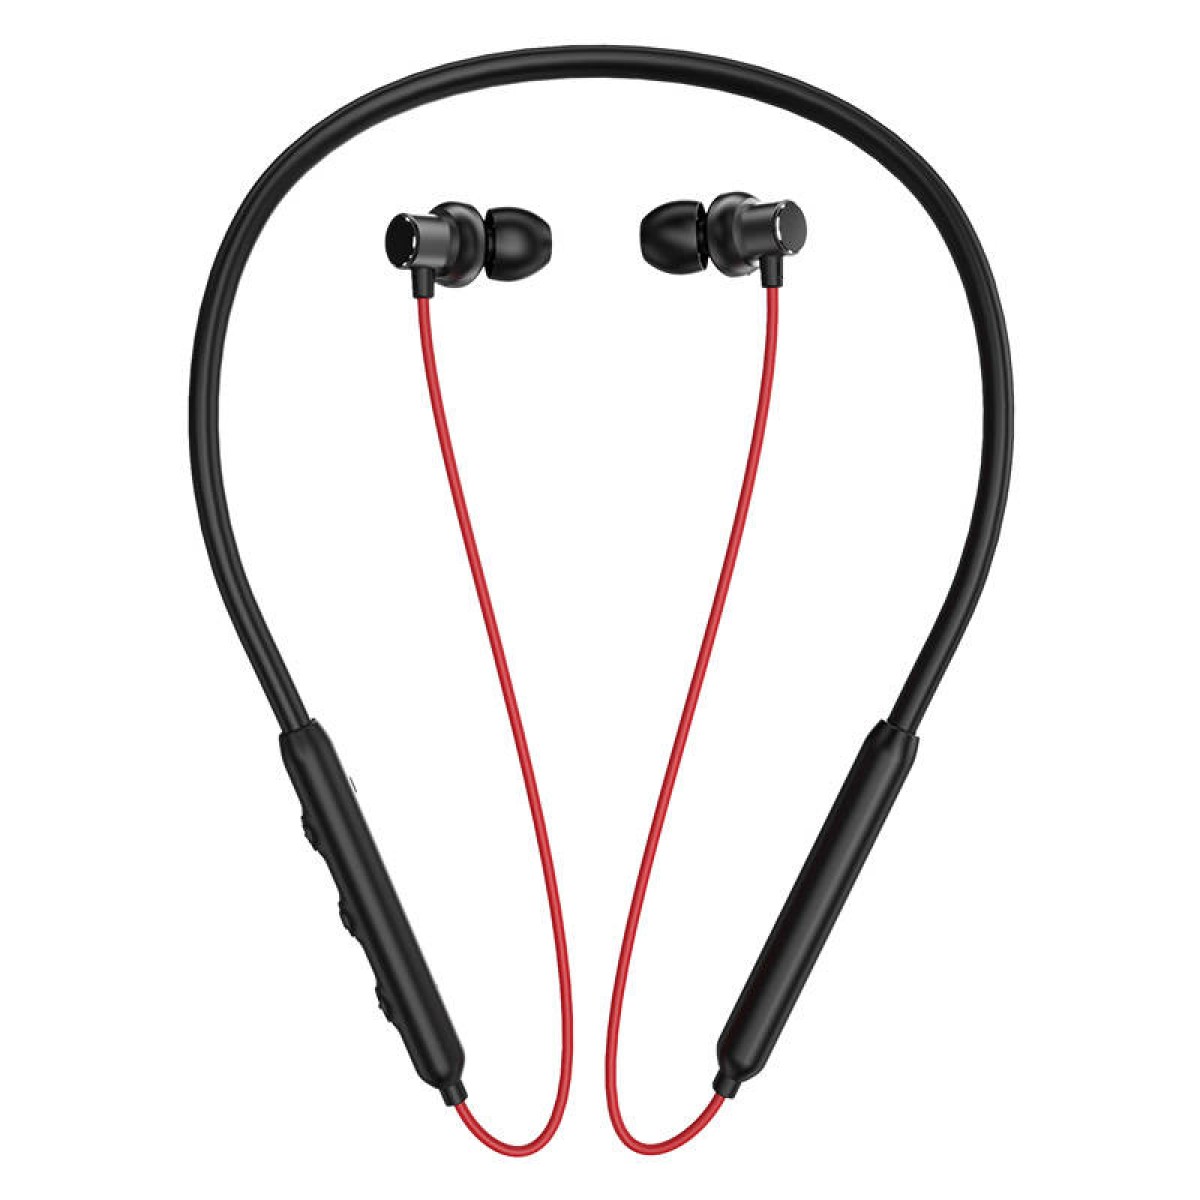 Neckband Earphones 1MORE Omthing airfree lace (red)